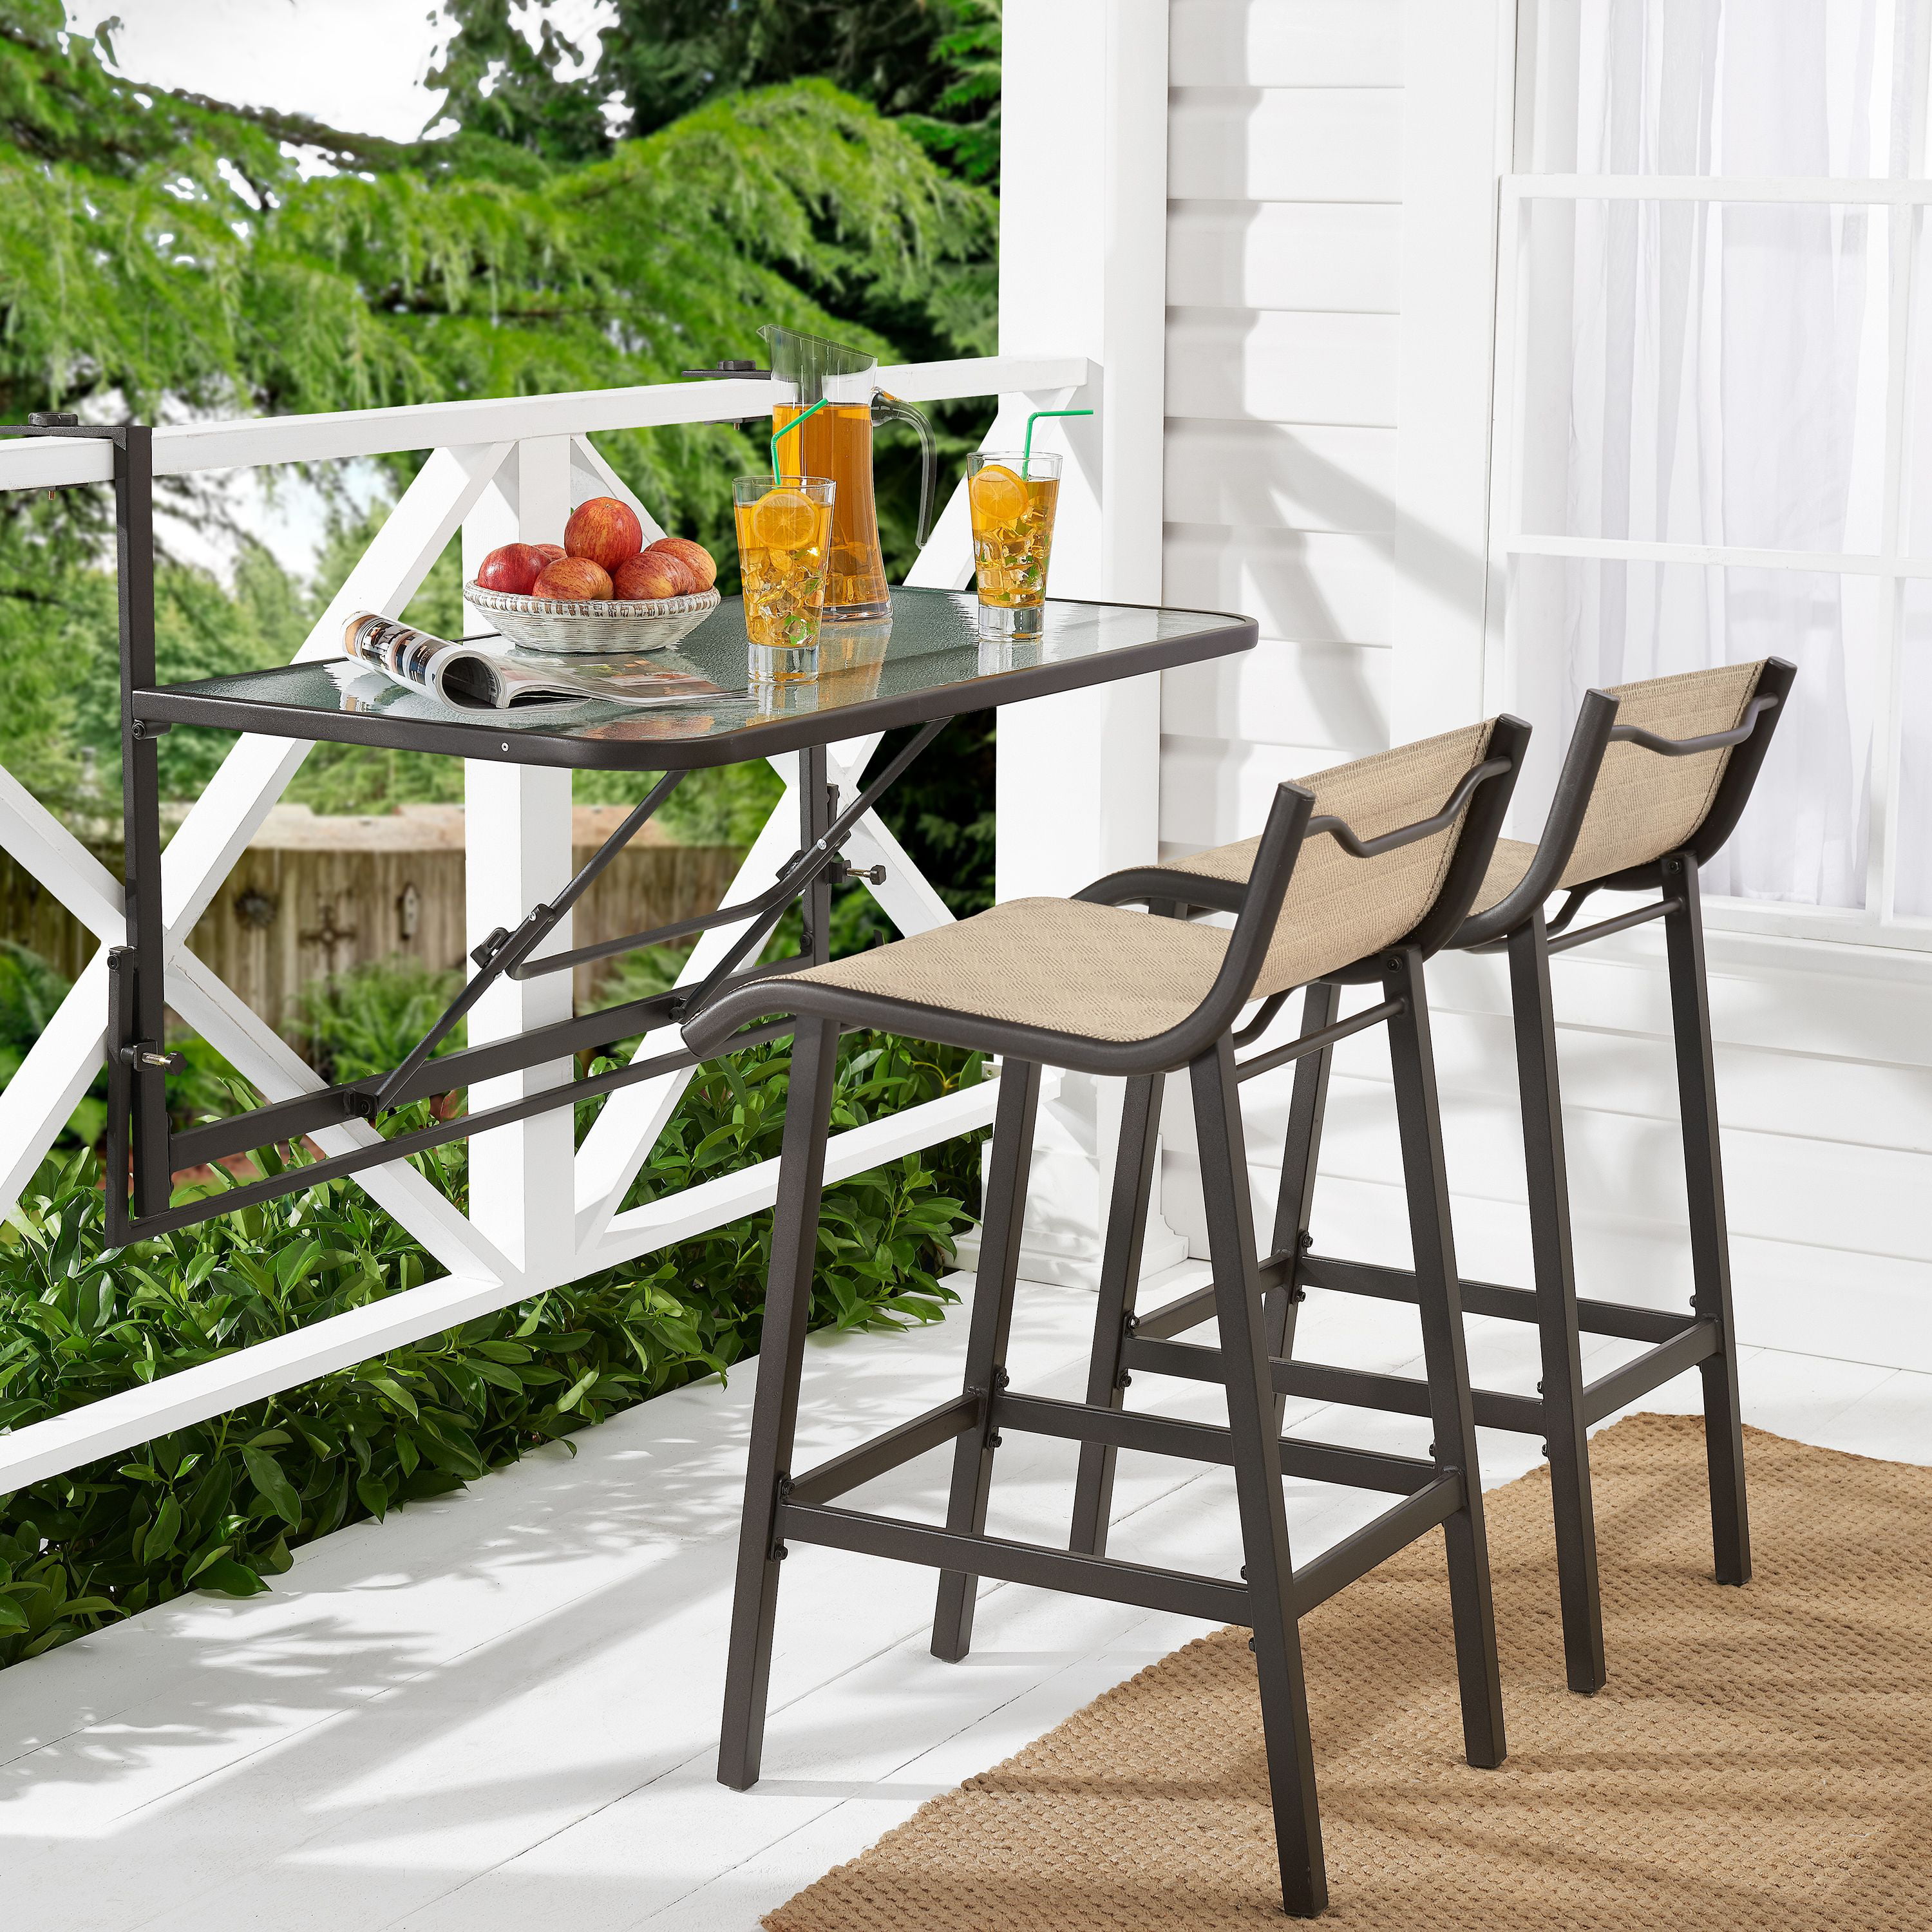 Mainstays Crowley Park 3 Piece Outdoor, Outdoor Bar Top Table And Chairs